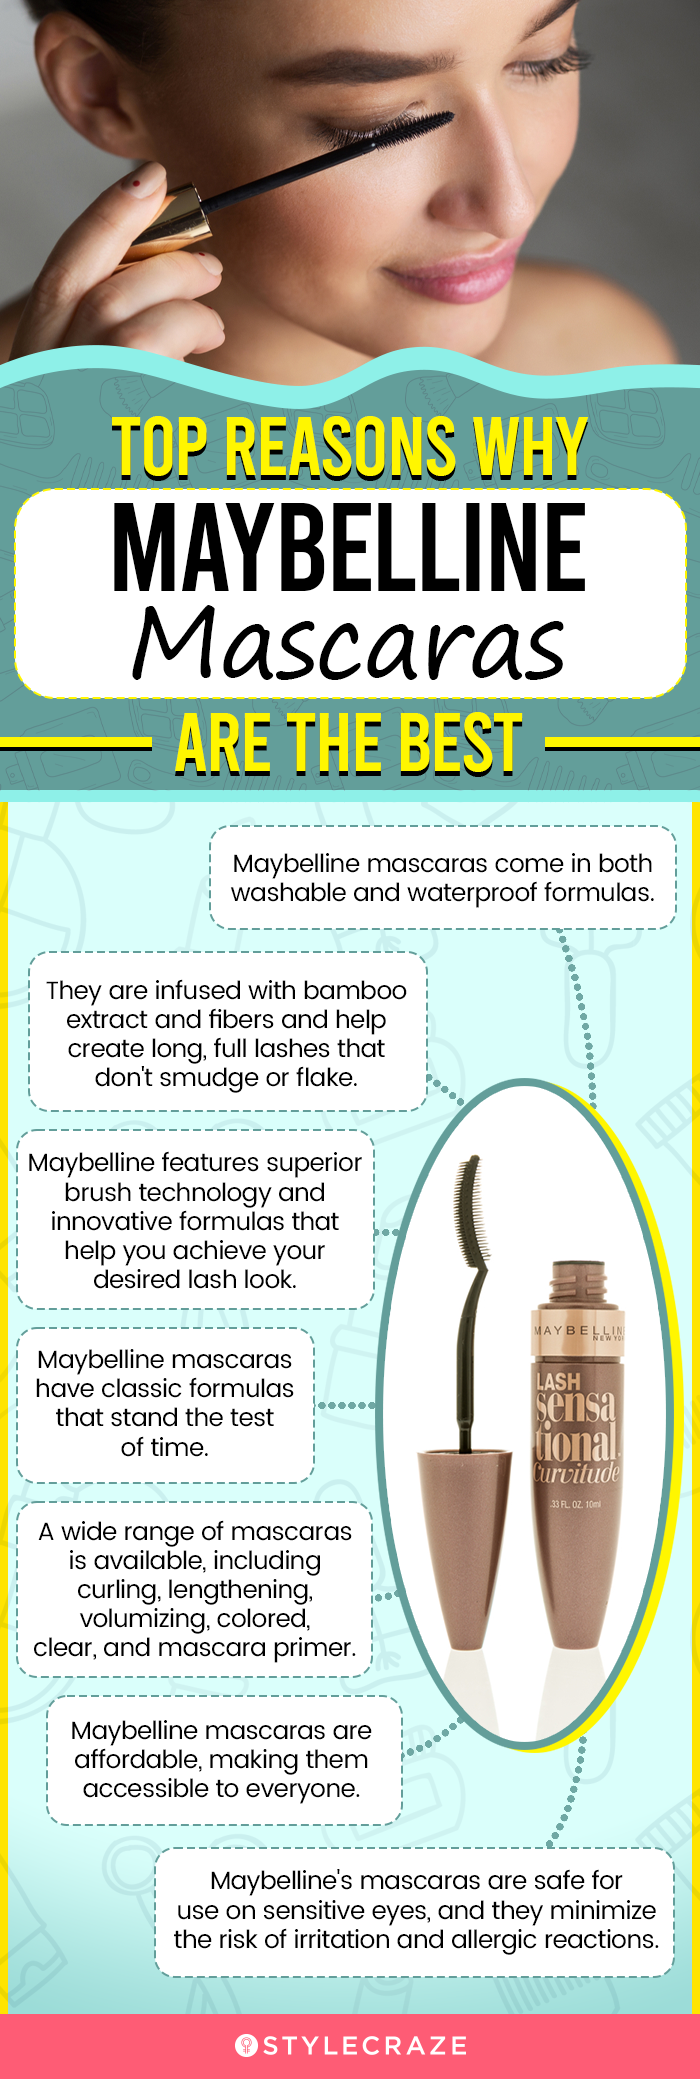 Top Reasons Why Maybelline Mascaras Are The Best (infographic)